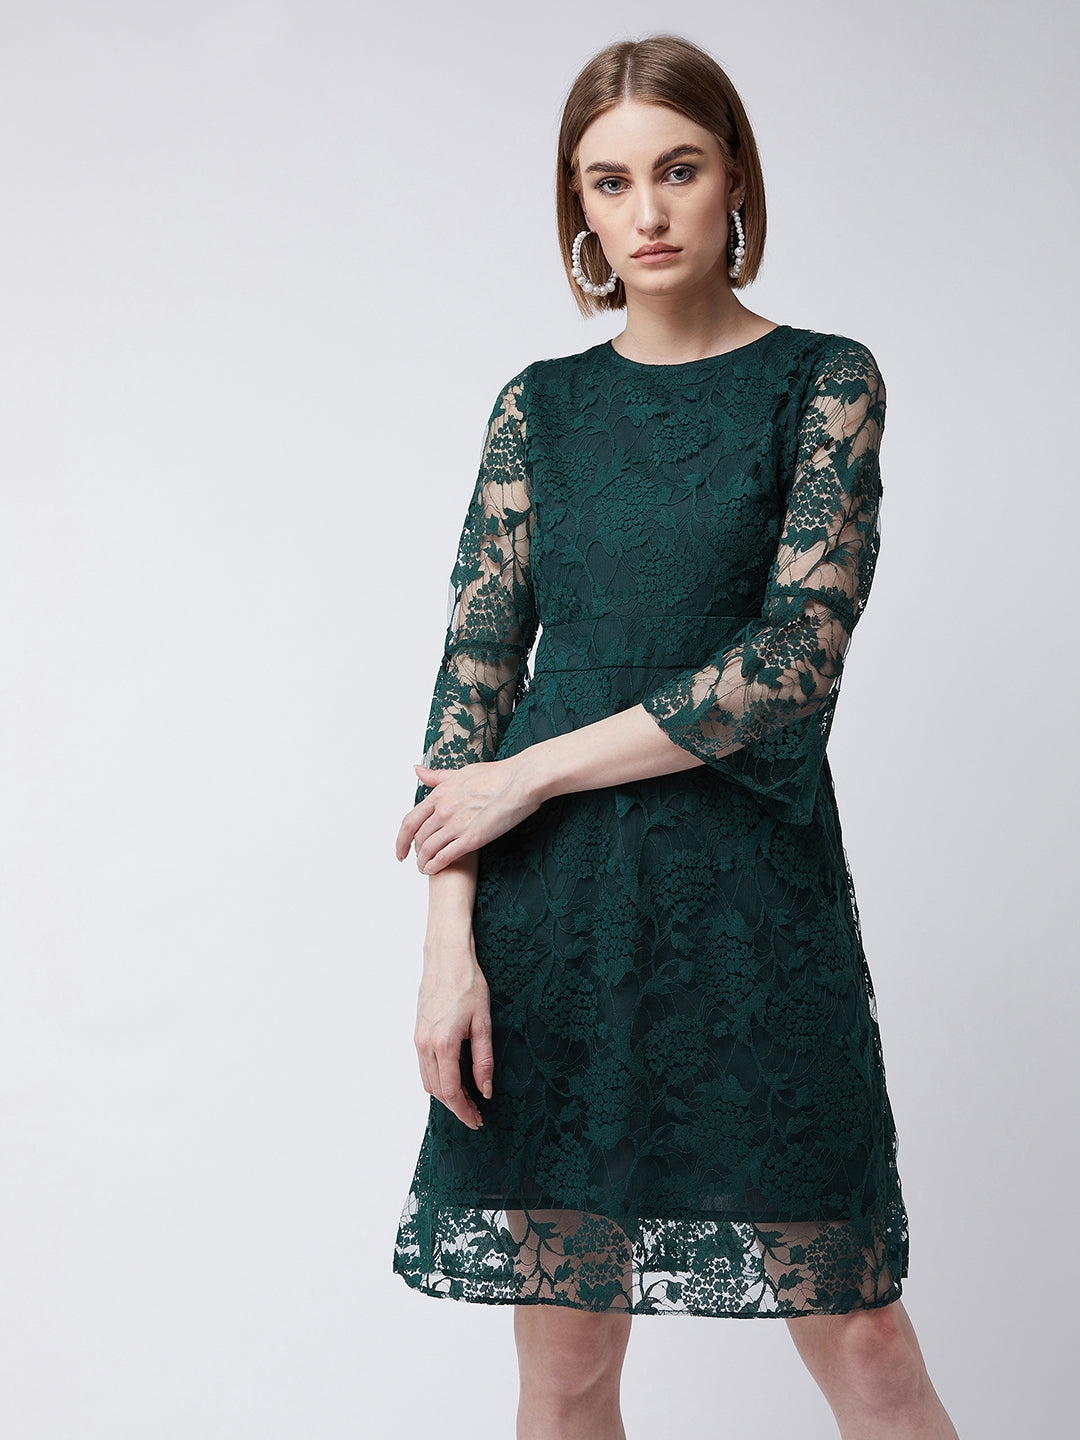 Forest Green Round Neck 3/4 Sleeves Floral A-Line Knee-Length Dress